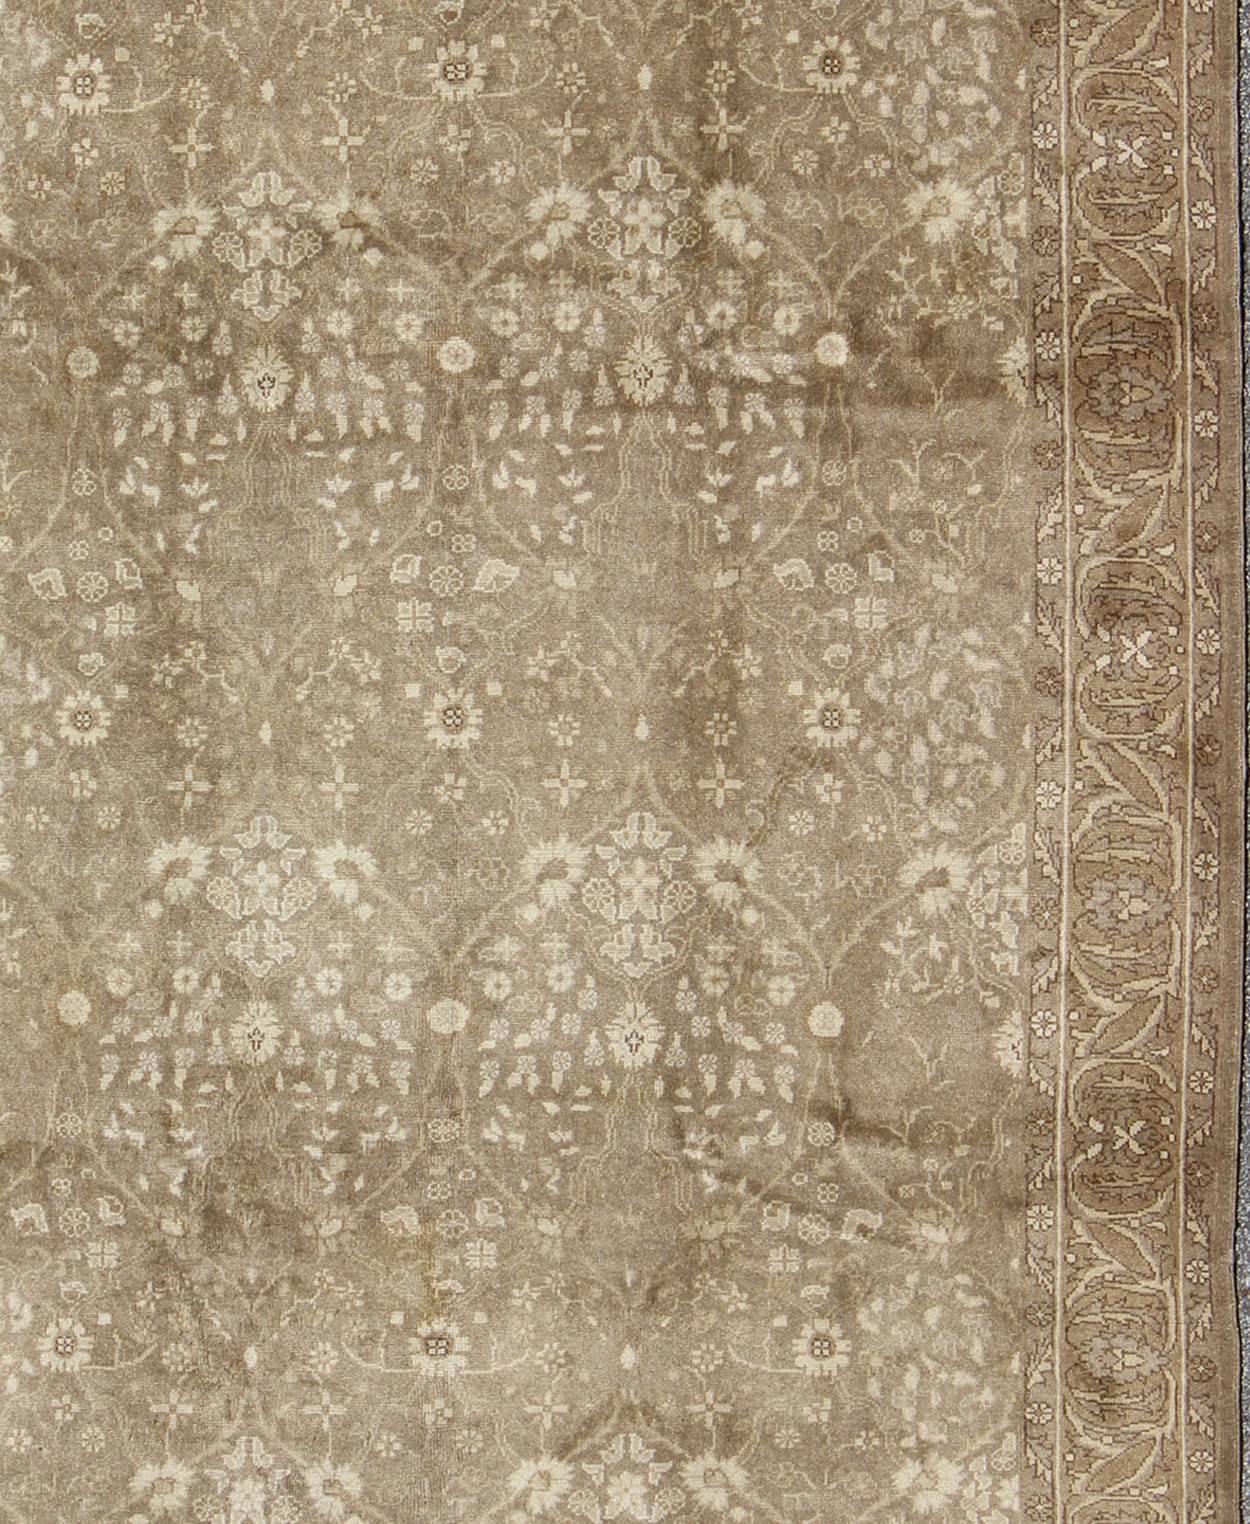 Midcentury Vintage Turkish Oushak Rug with All-Over Botanical Pattern in Neutral In Good Condition For Sale In Atlanta, GA